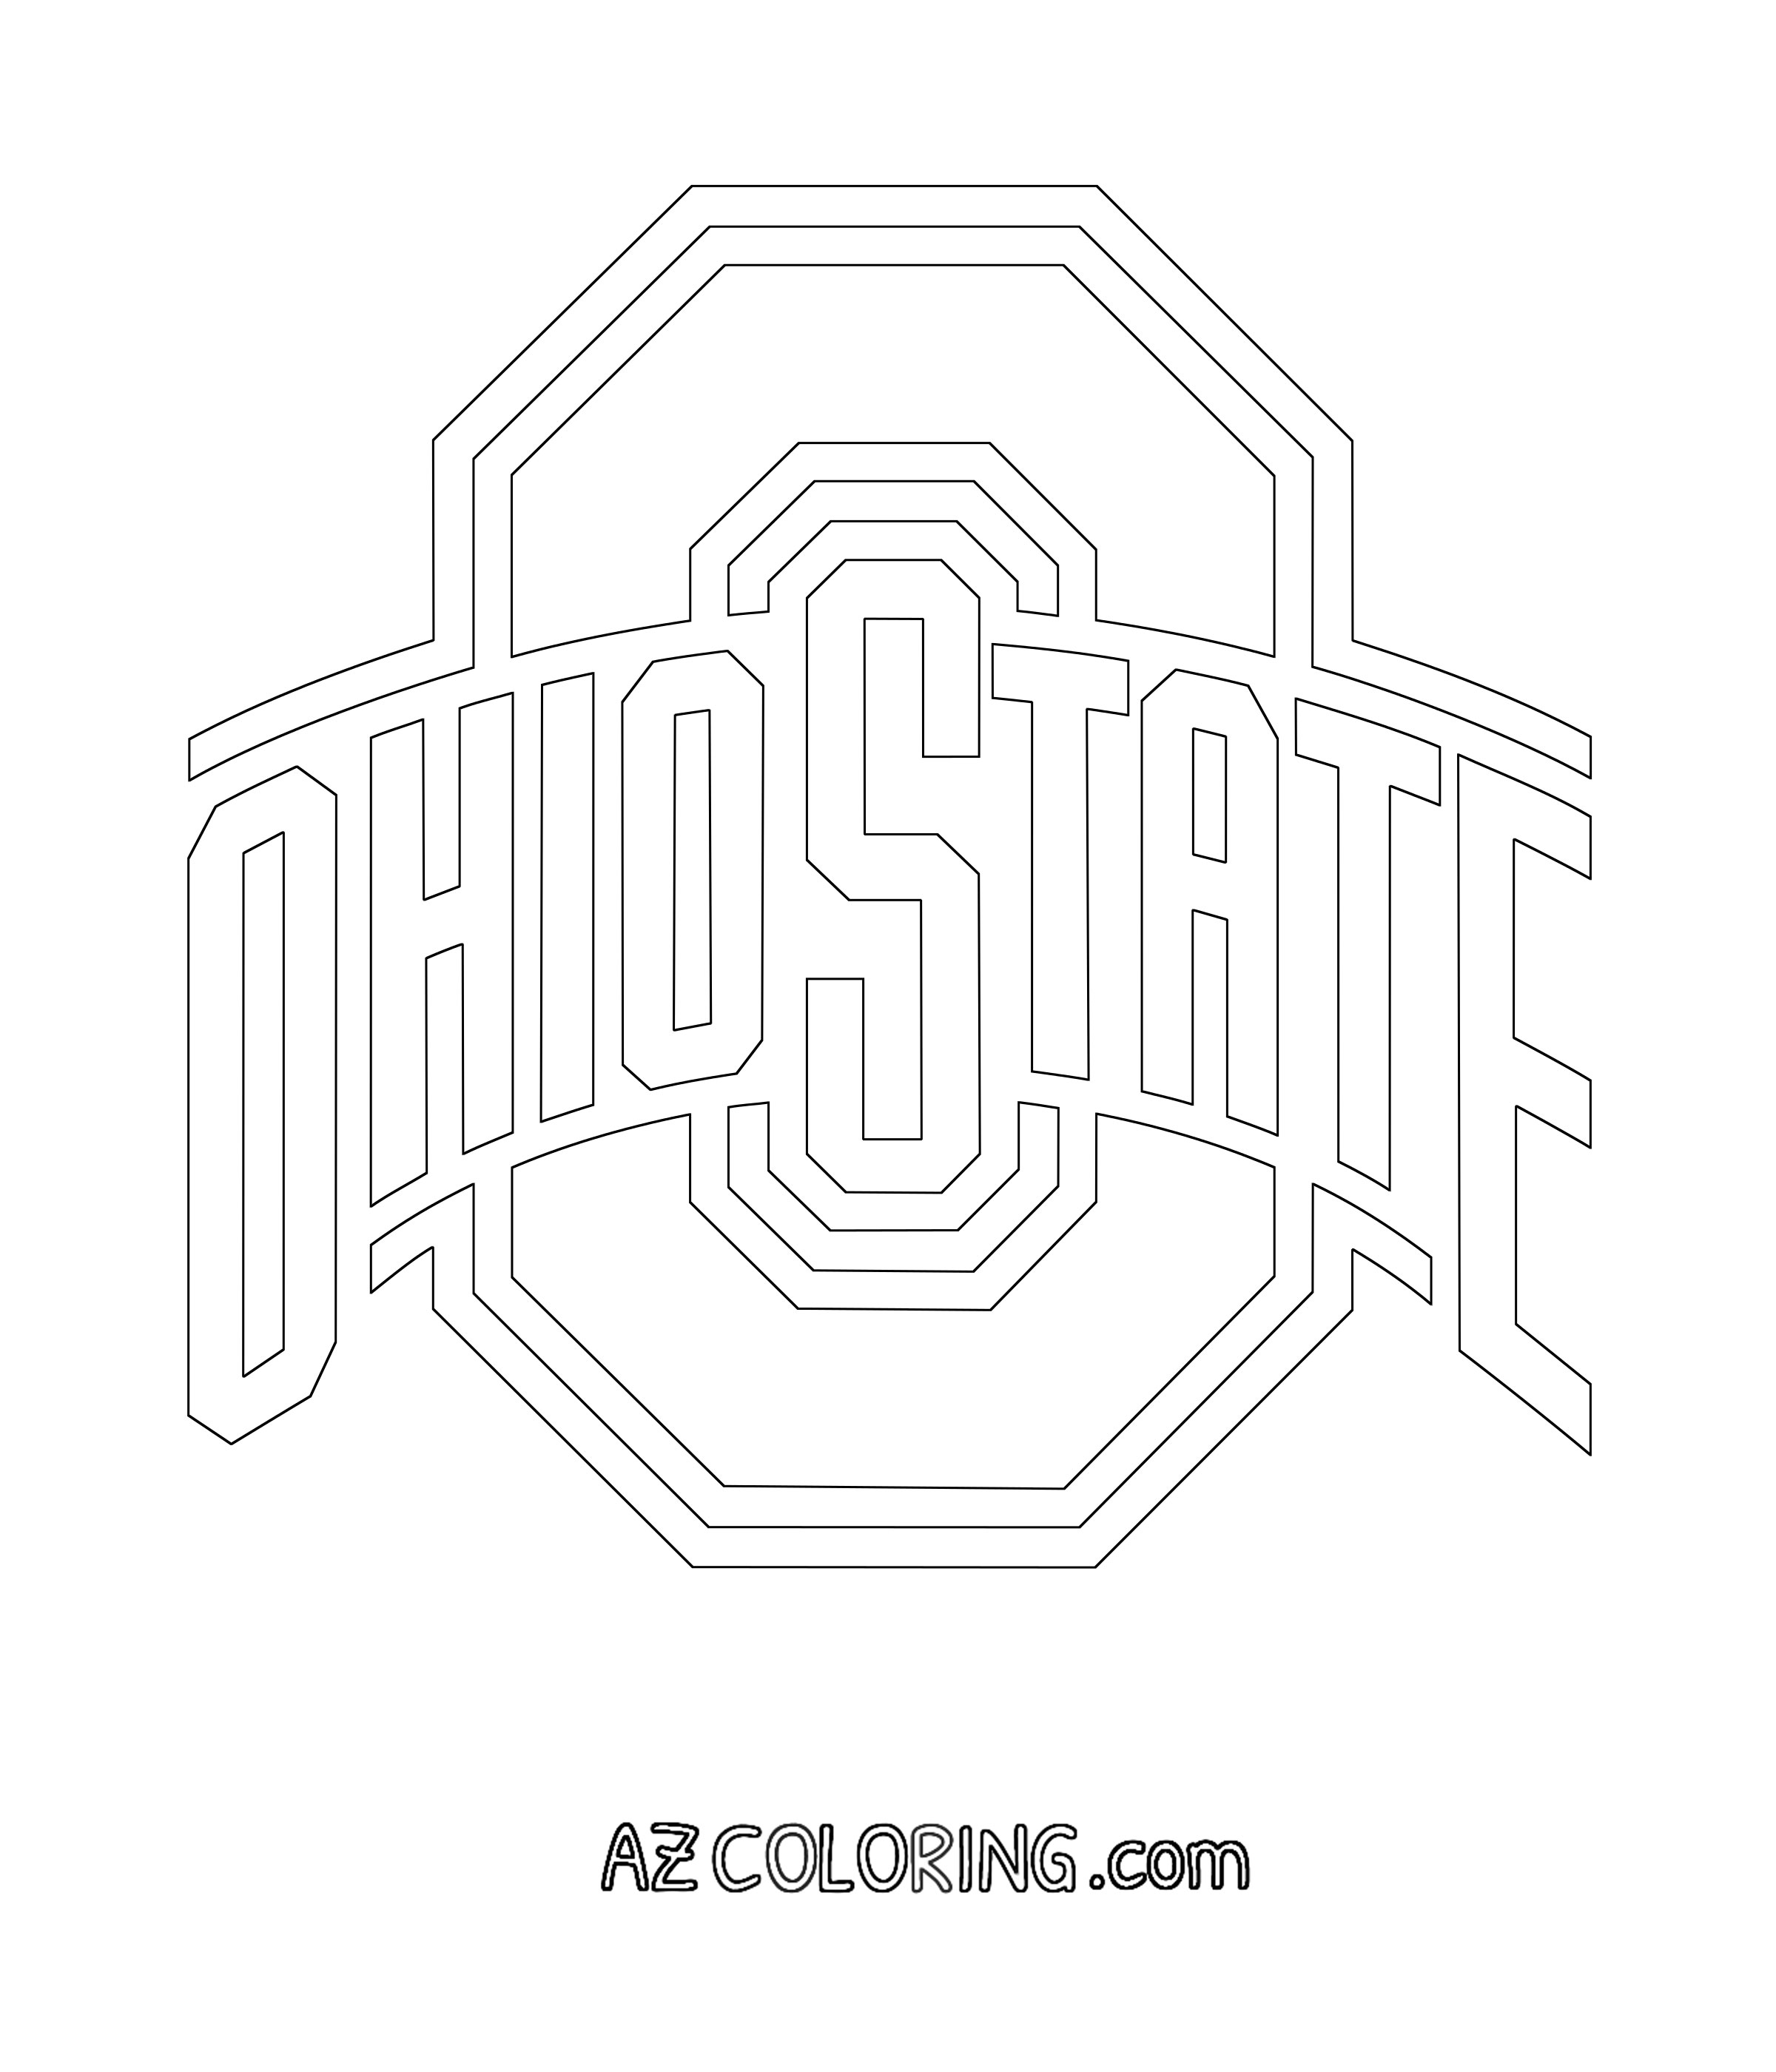 Ohio State Buckeyes Coloring Sheets - Food Ideas